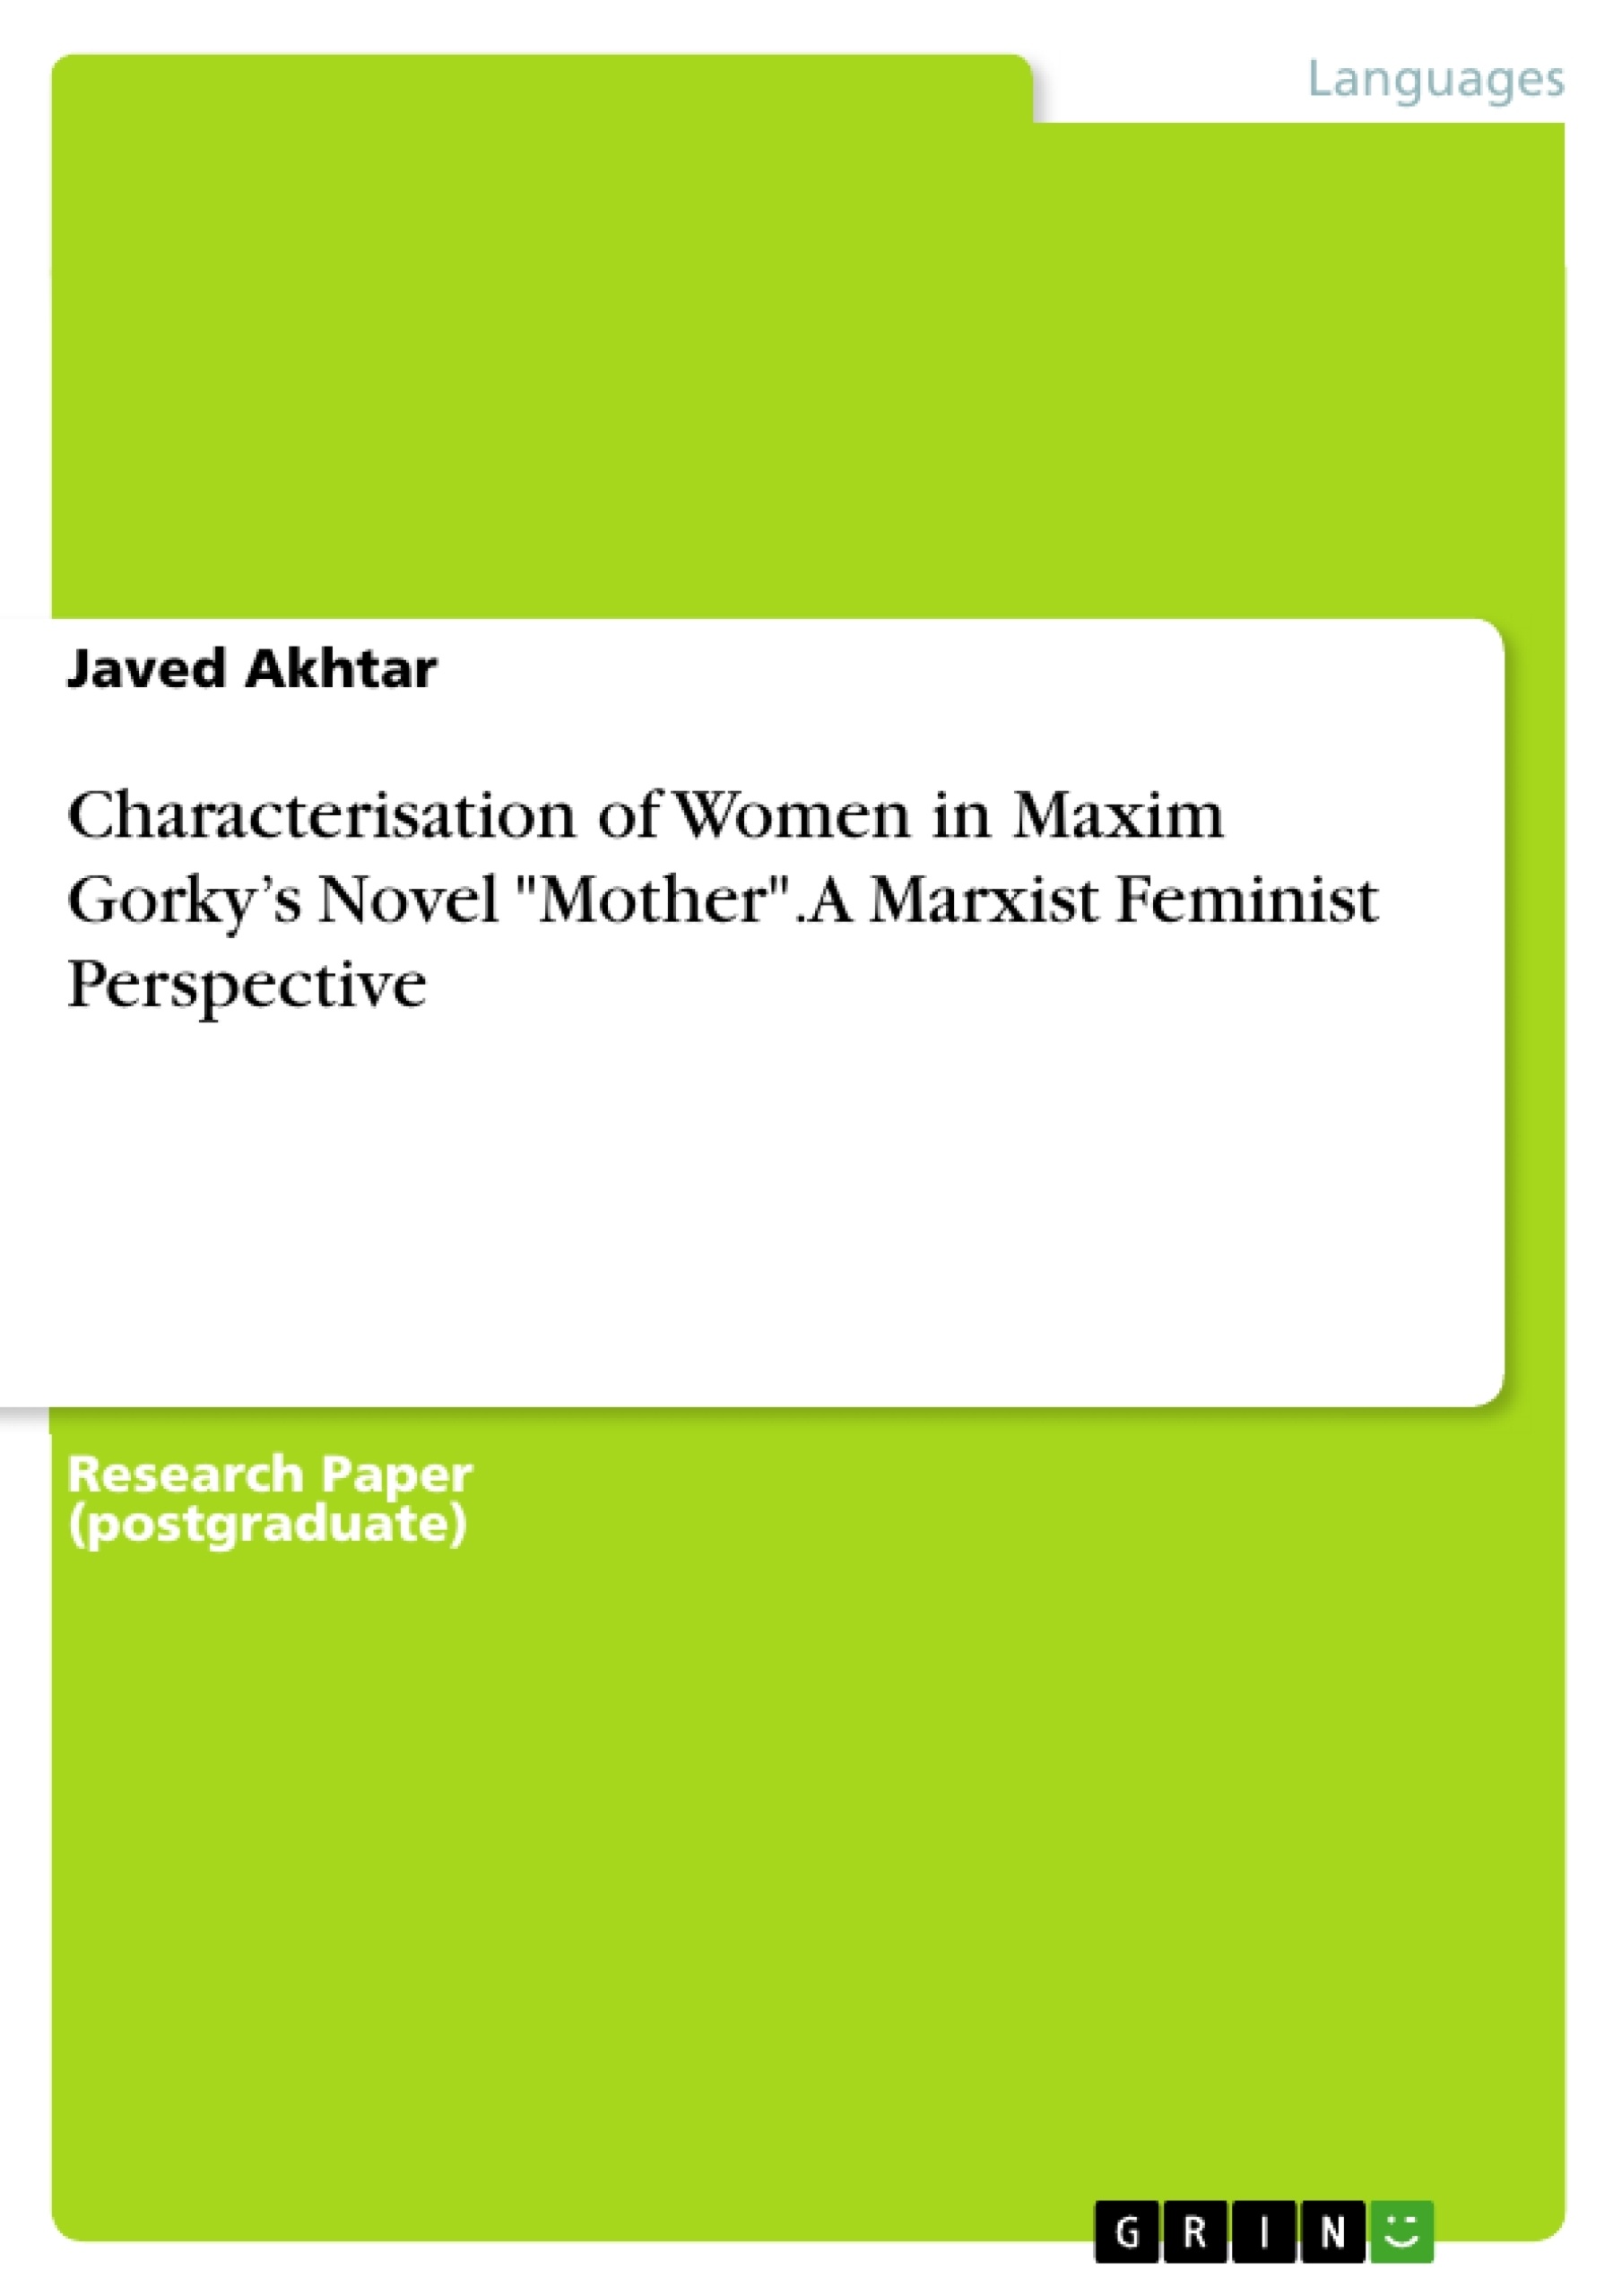 Title: Characterisation of Women in Maxim Gorky’s Novel "Mother". A Marxist Feminist Perspective